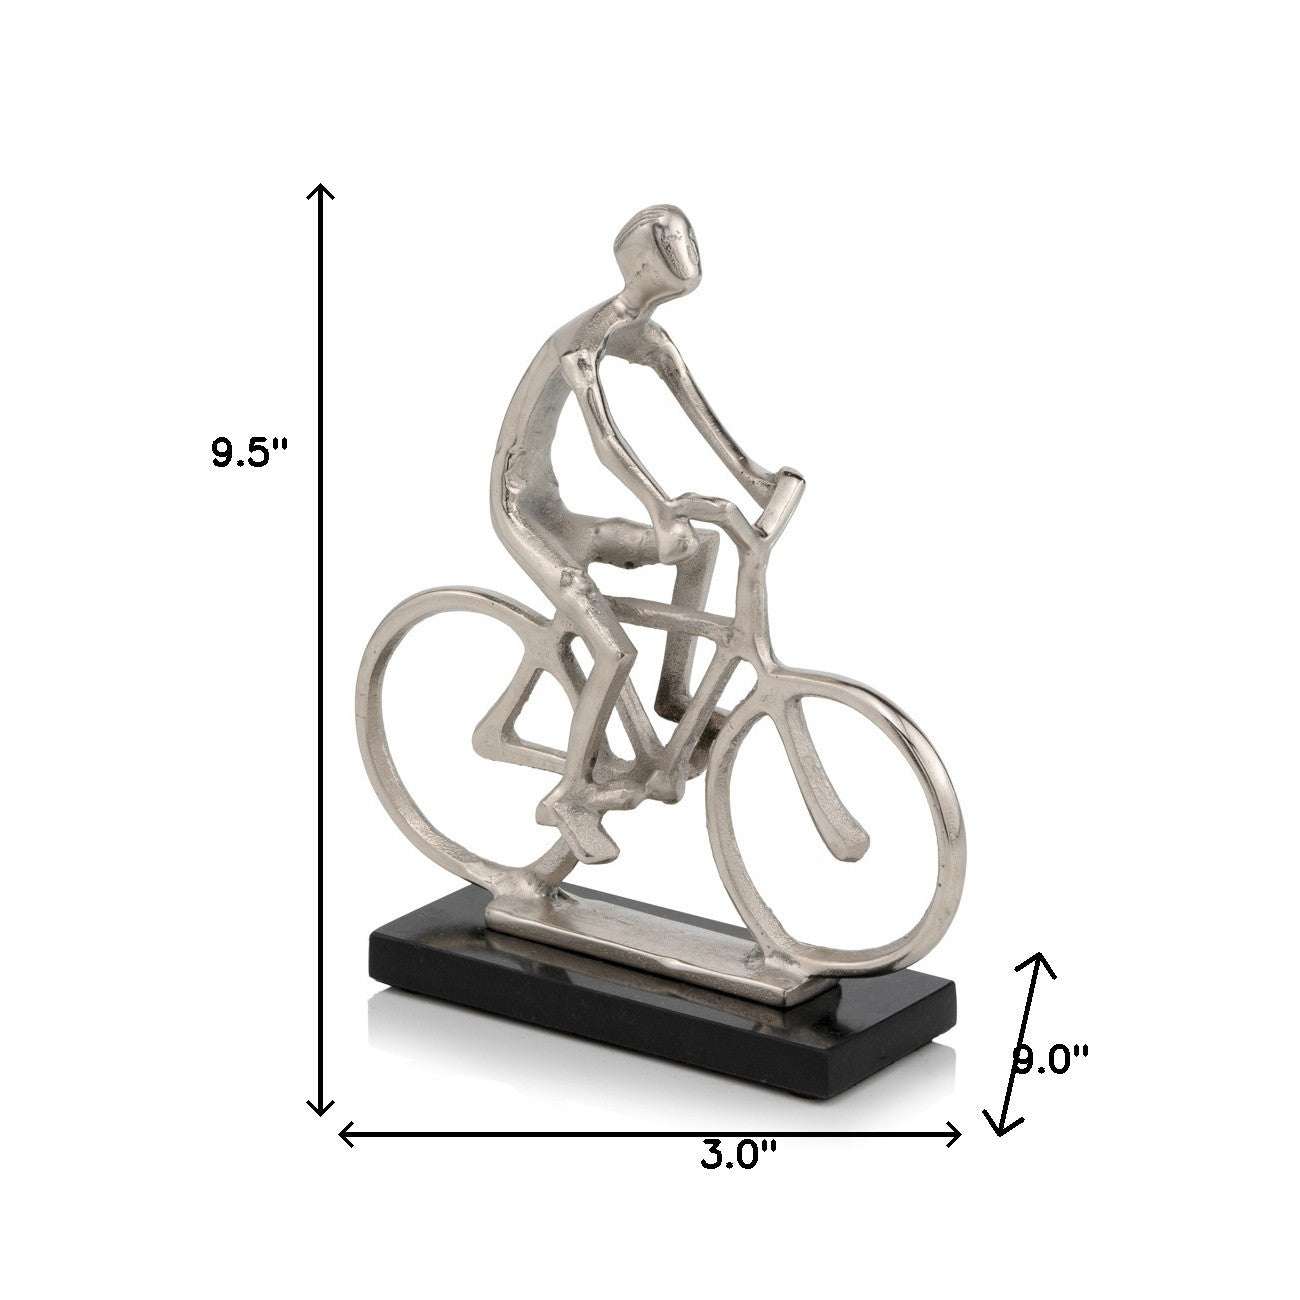 10" Silver and Black Marble Aluminum Man on Bike Sculpture